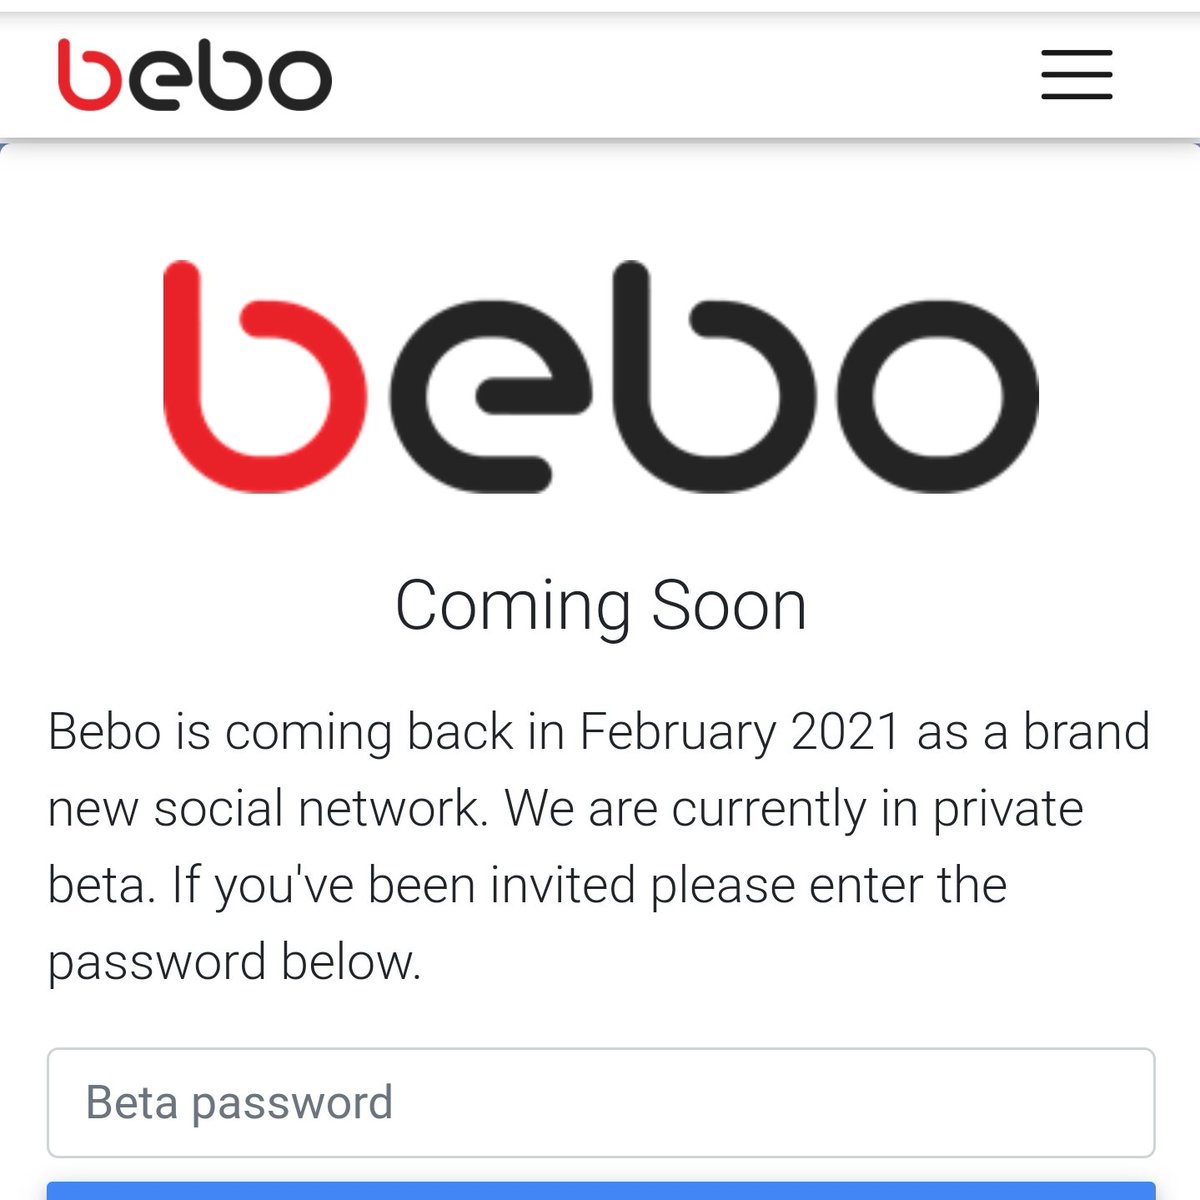 Yep, Bebo has been trending today because it is coming back! Wish the team good luck with it #BeboIsBack #Bebo